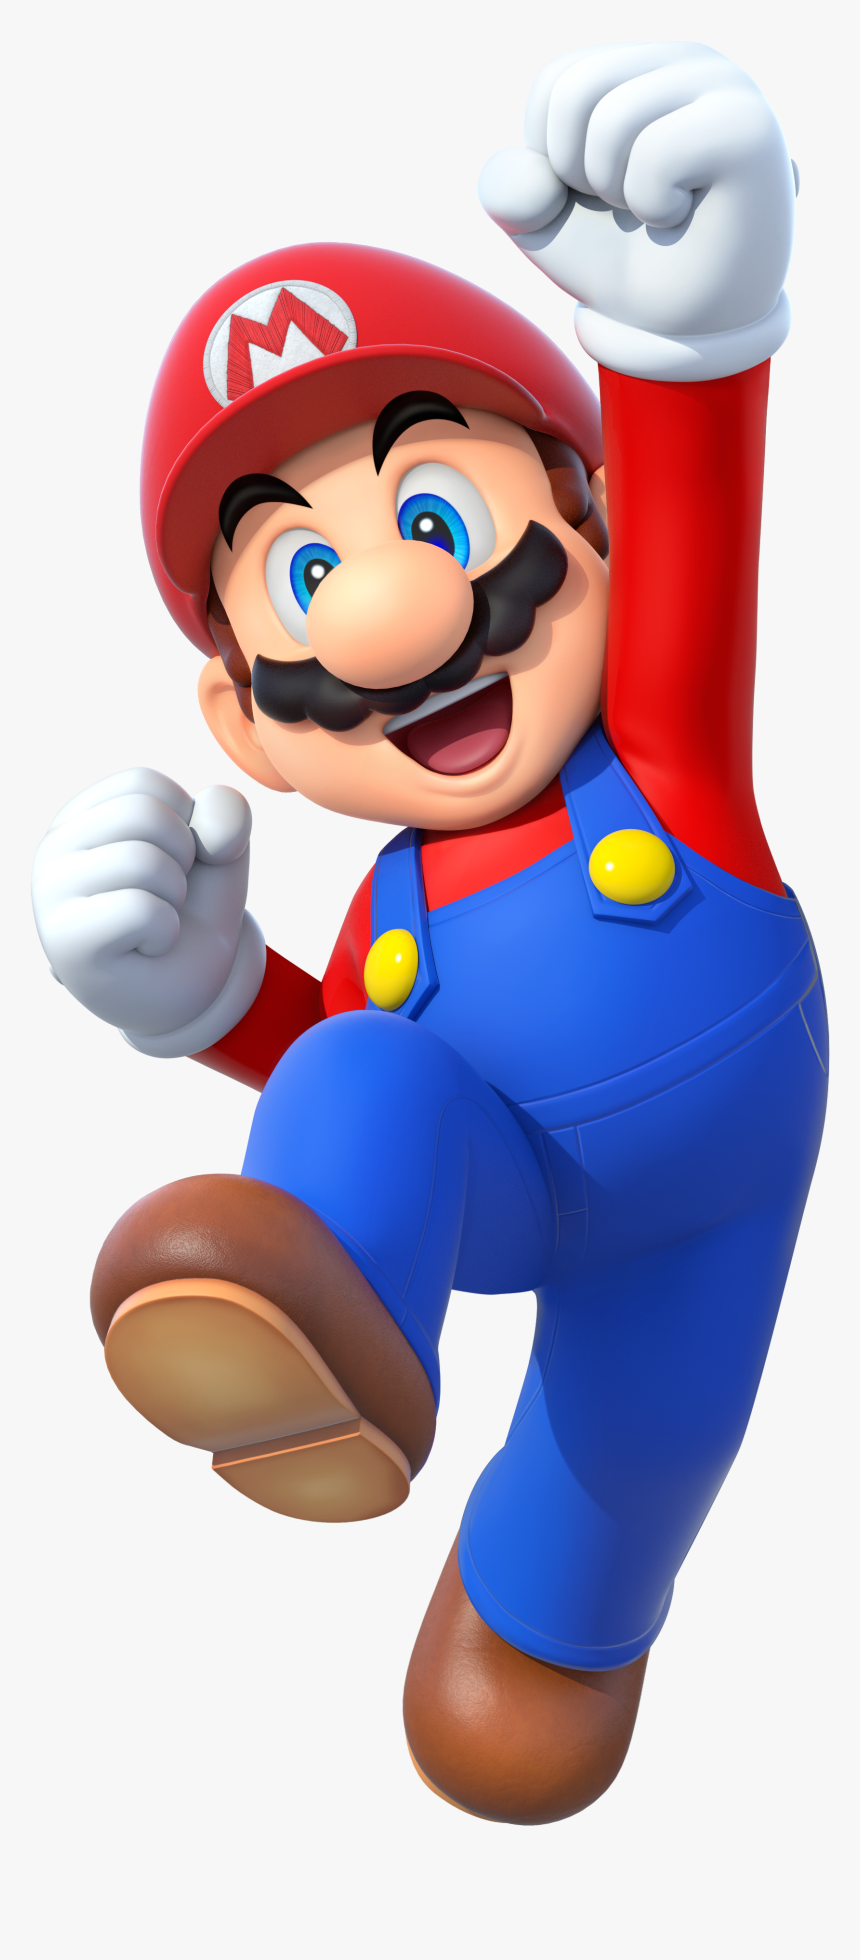 Free Download Of Mario Png In High Resolution - Mario Party 10 Mario, Transparent Png, Free Download